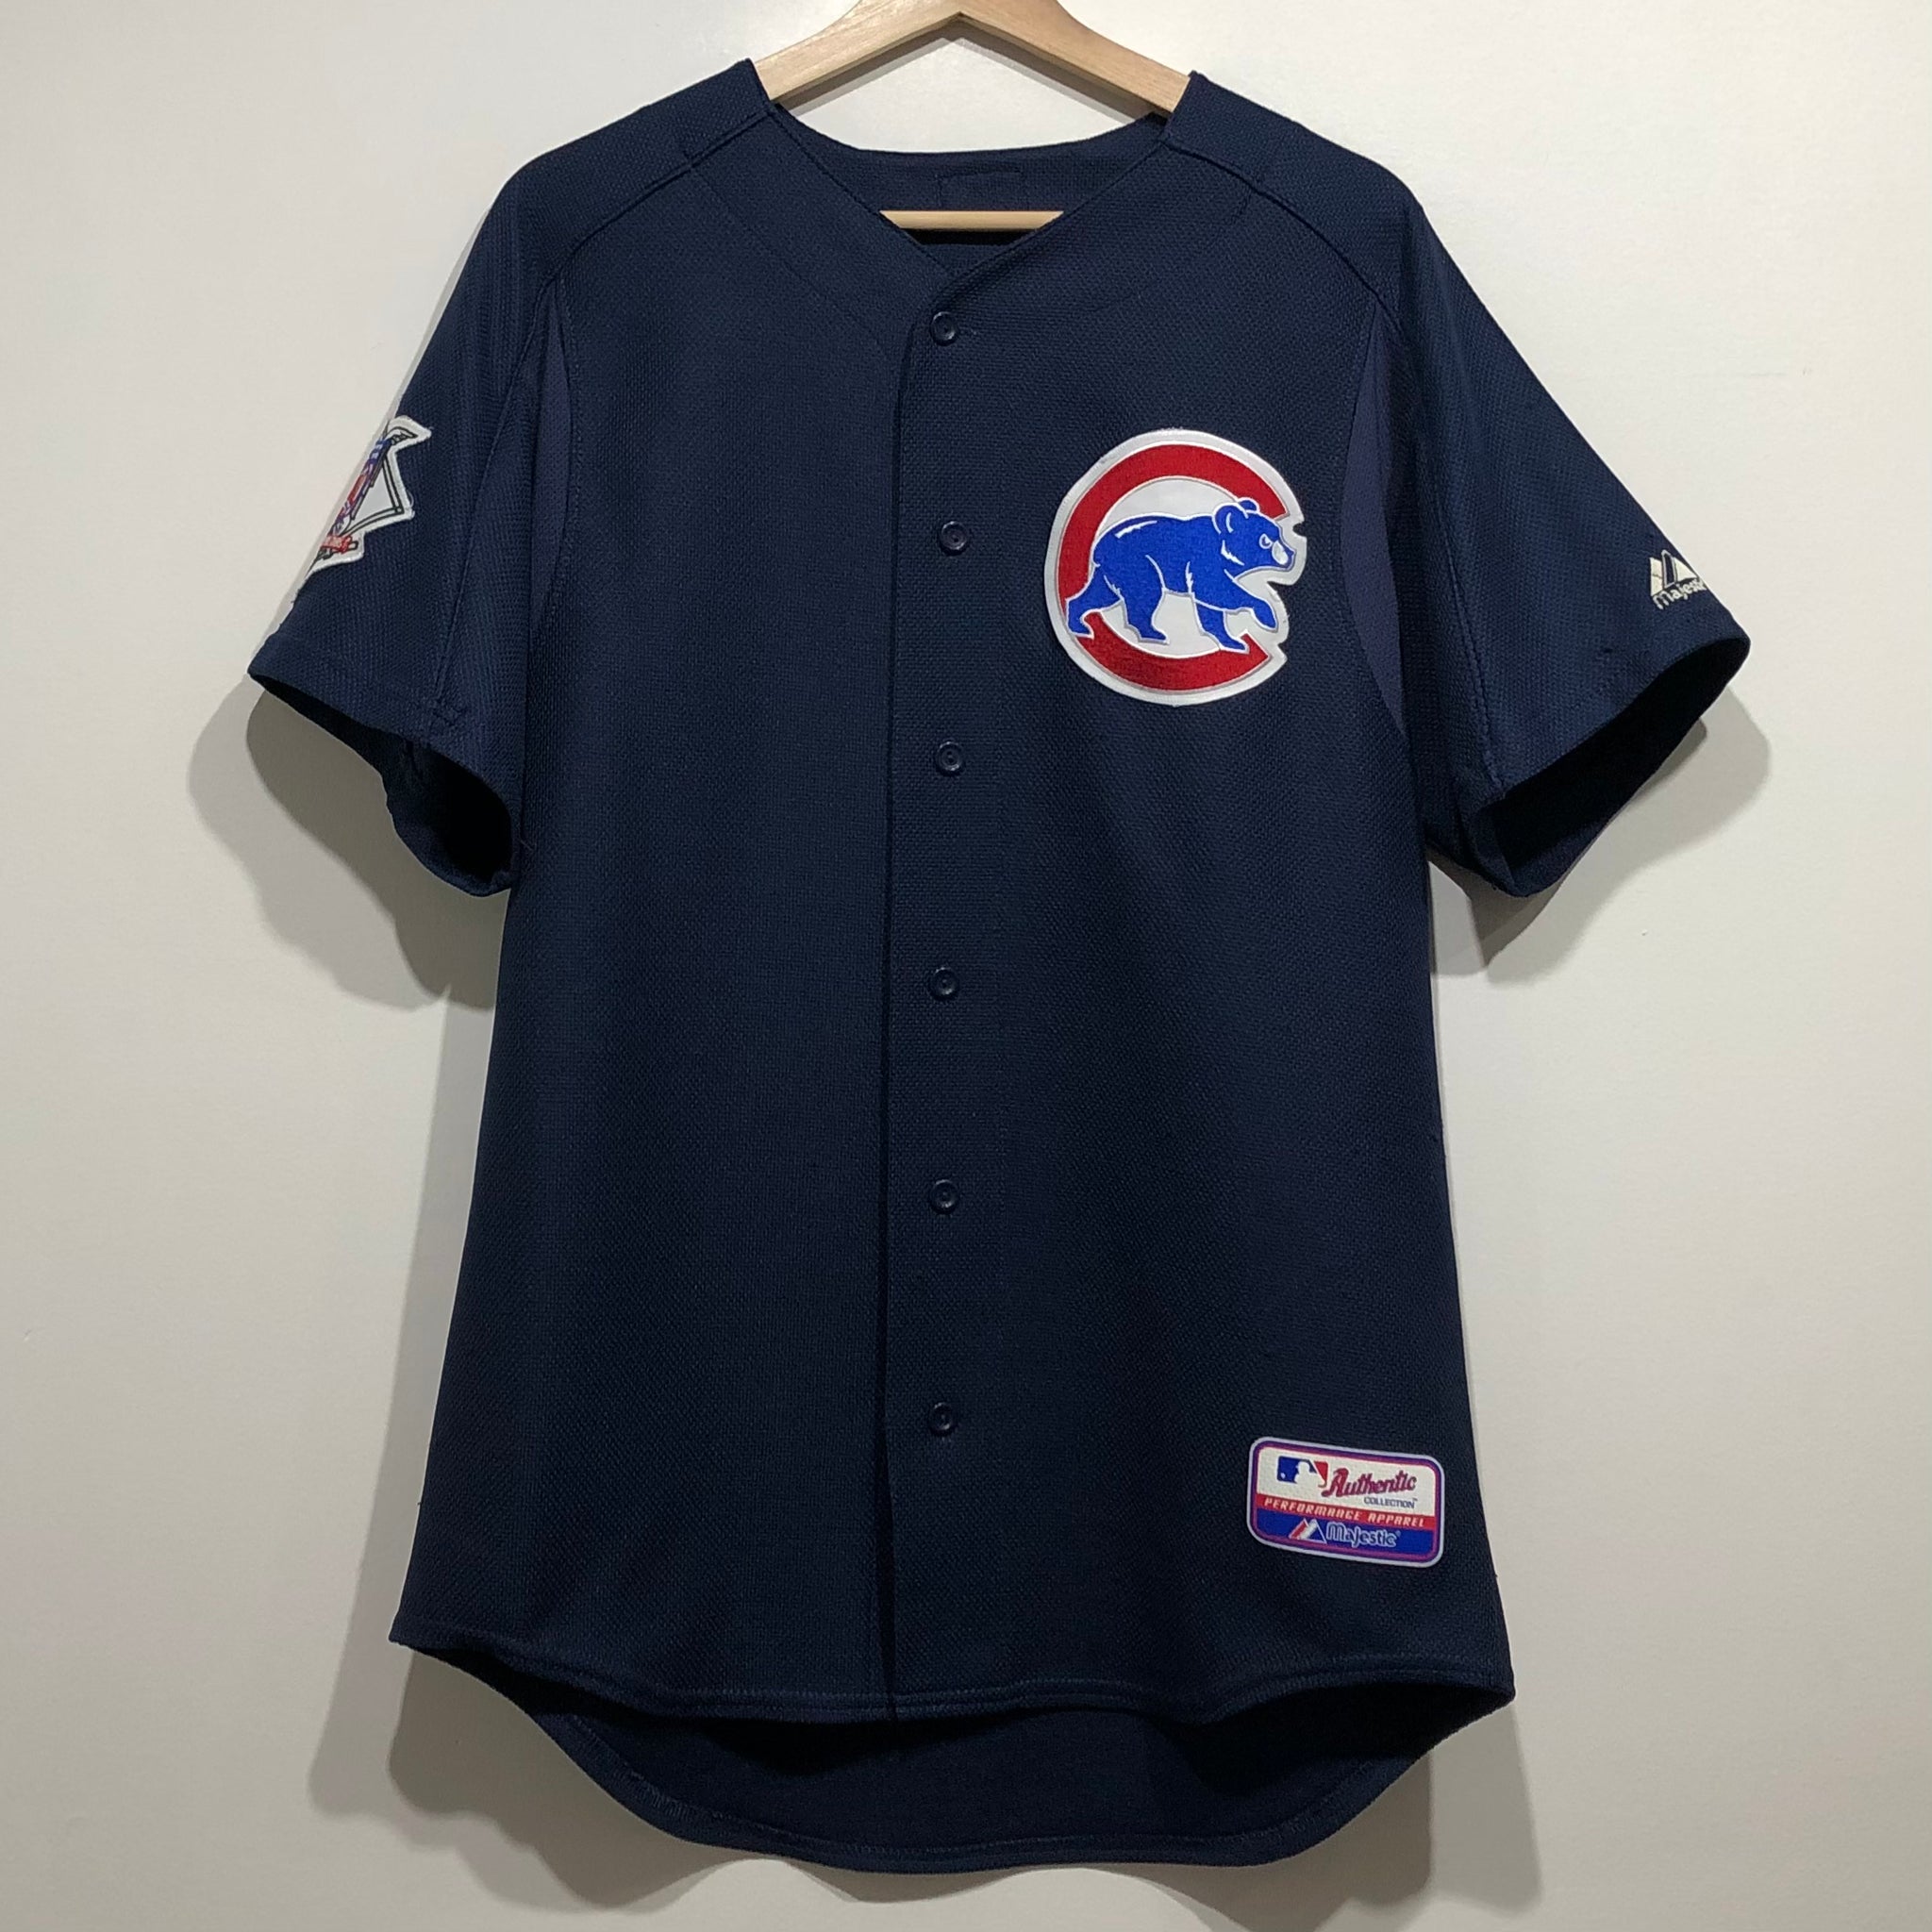 Sammy Sosa Chicago Cubs T-Shirt by NIKE